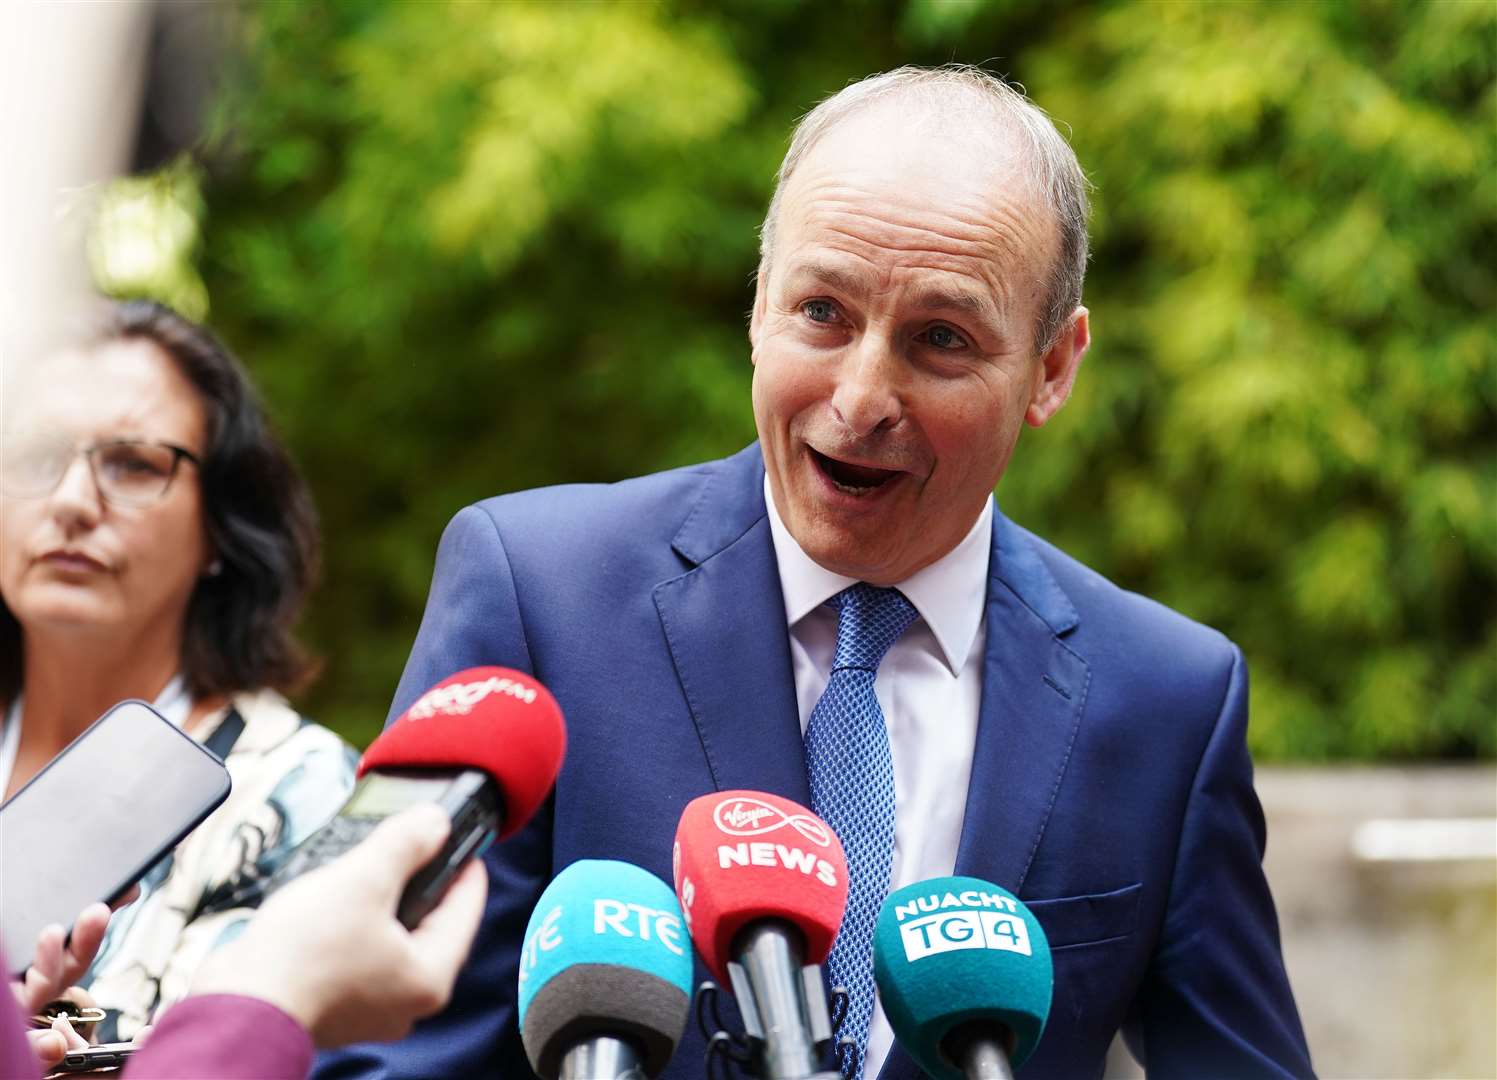 Tanaiste Micheal Martin speaking to members of the media following the opening session of the Consultative Forum on International Security Policy (Brian Lawless/PA)